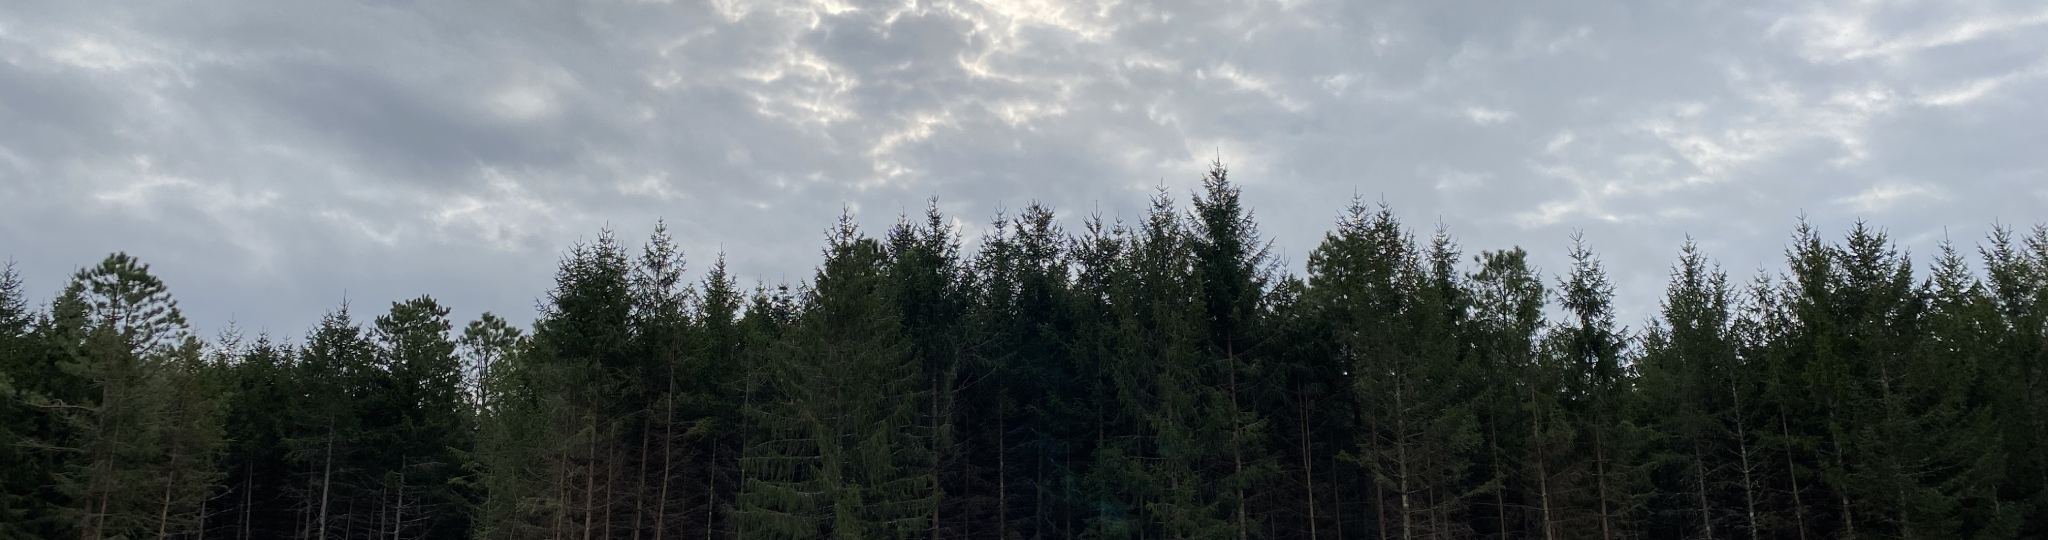 Landscape of trees with a cloudy sky.